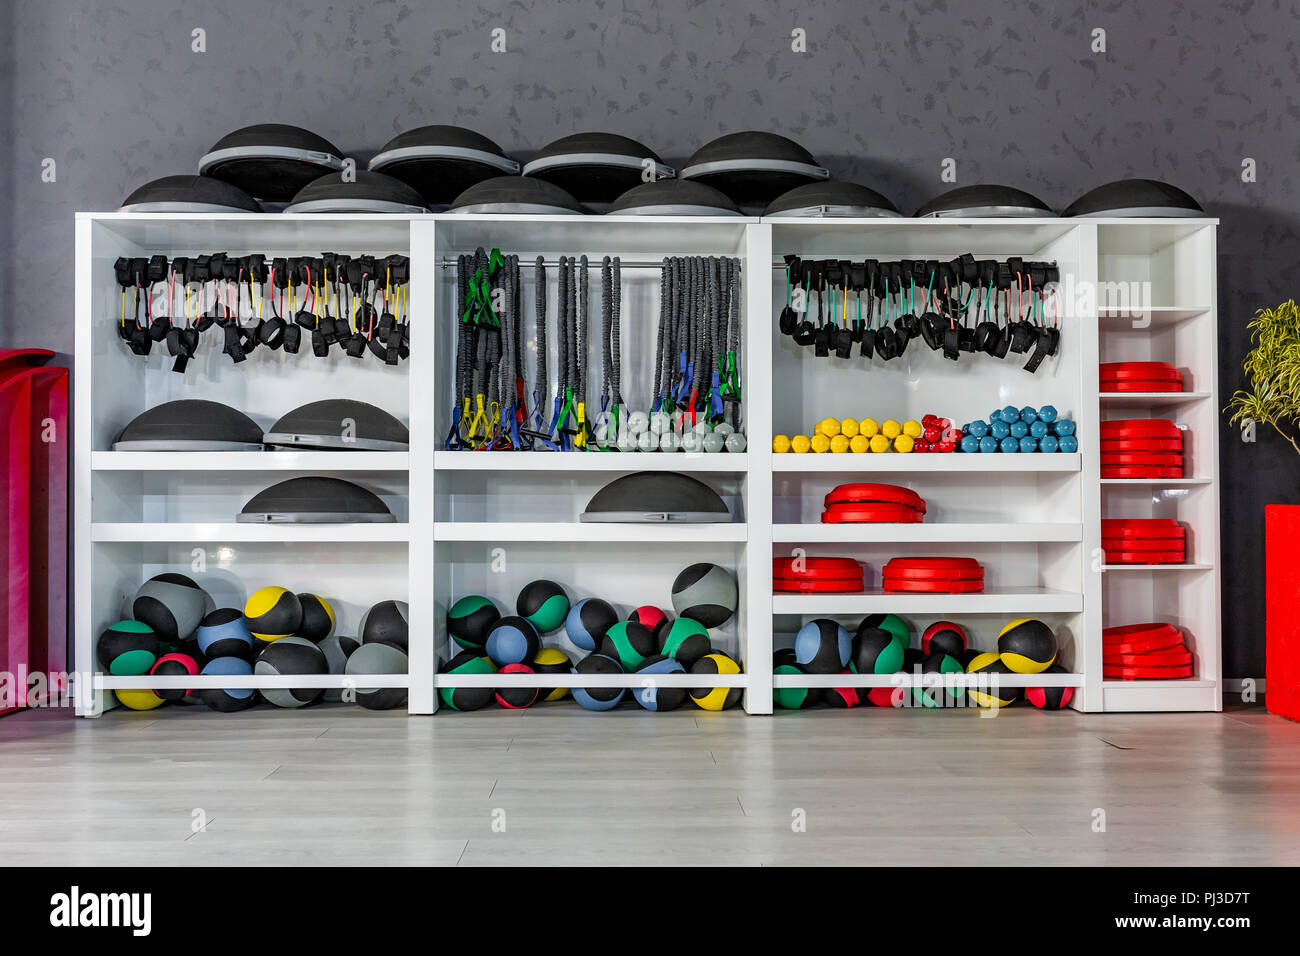 Dumbbells lying on the shelves. Gym. Equipment for a sports hall. Stock Photo